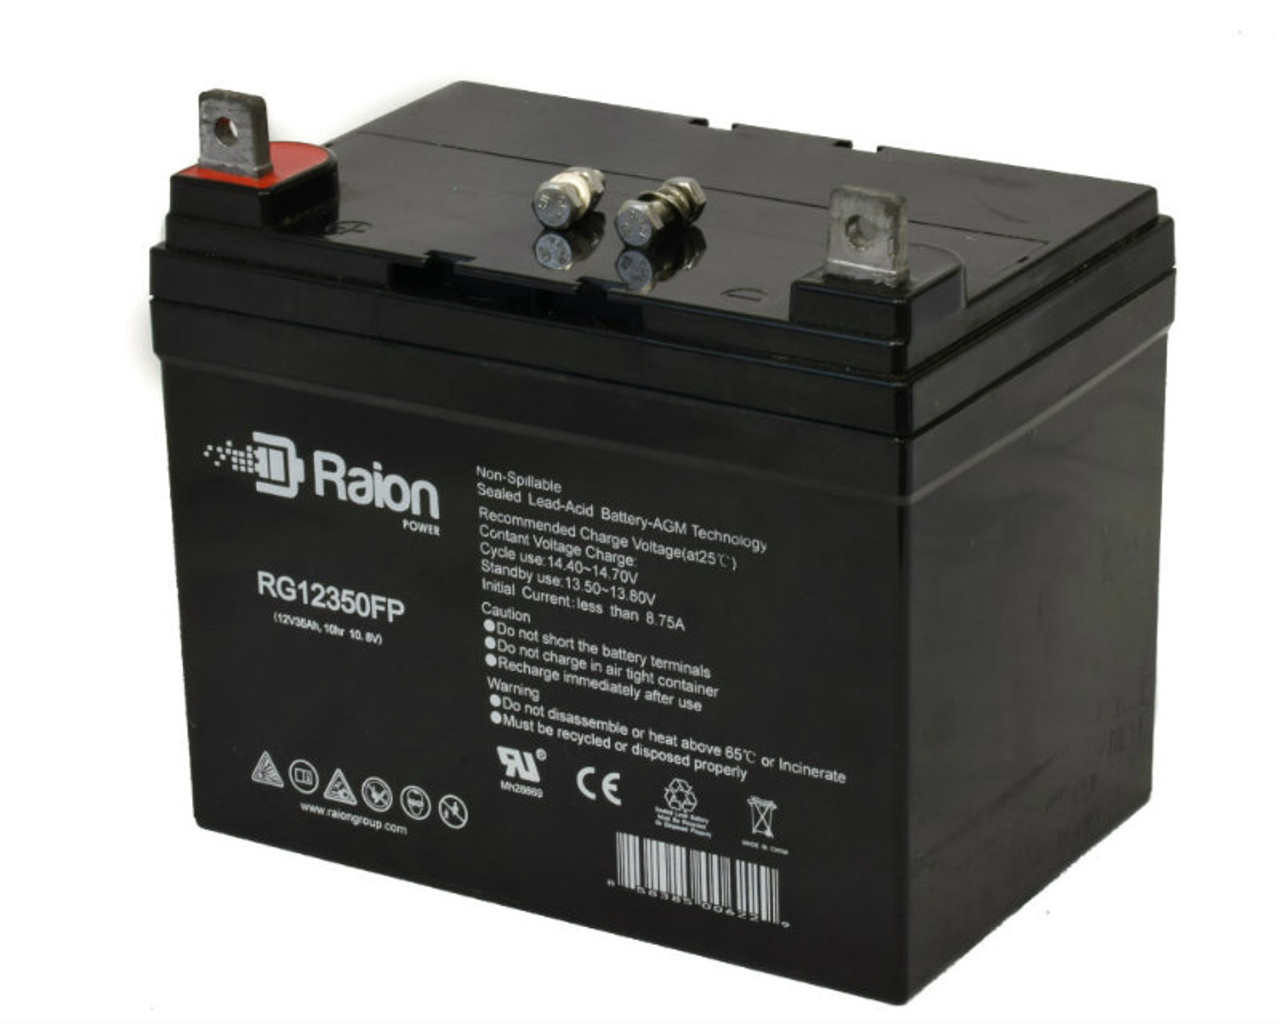 Raion Power Replacement 12V 35Ah RG12350FP Mobility Scooter Battery for Golden Technologies Compass Sport GP605